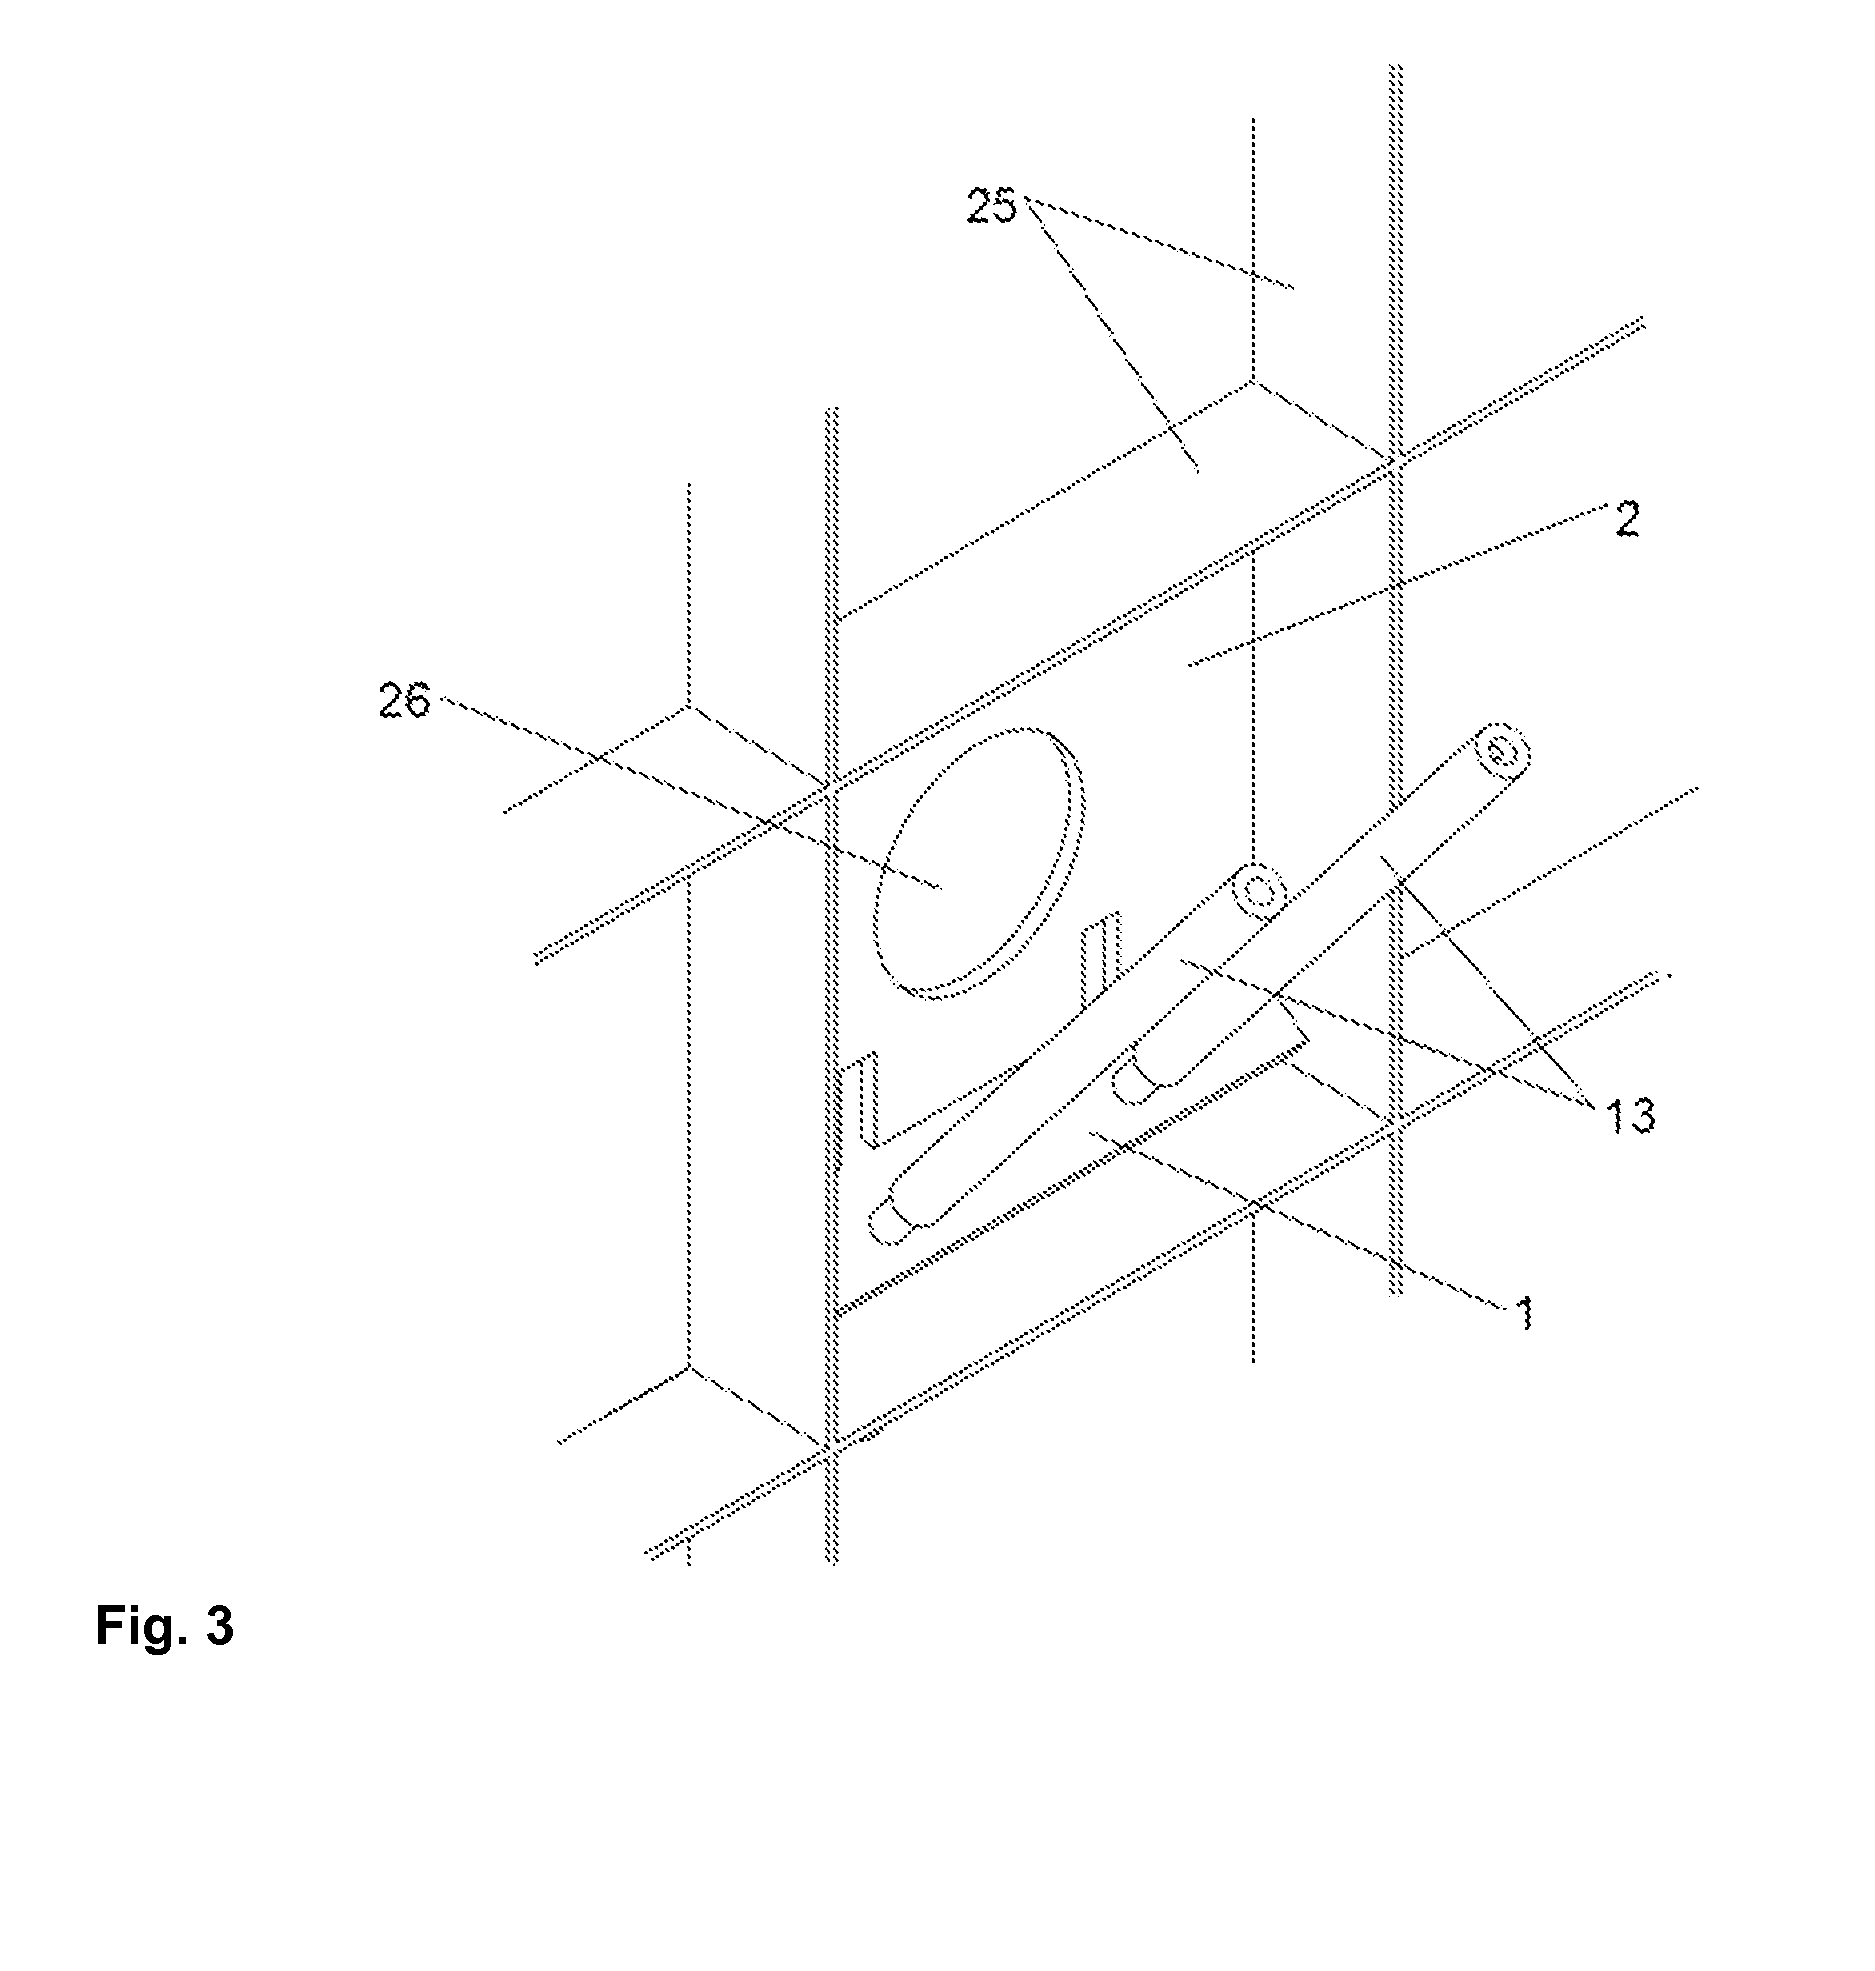 Wall for receiving wear plates and method for replacing wear plates